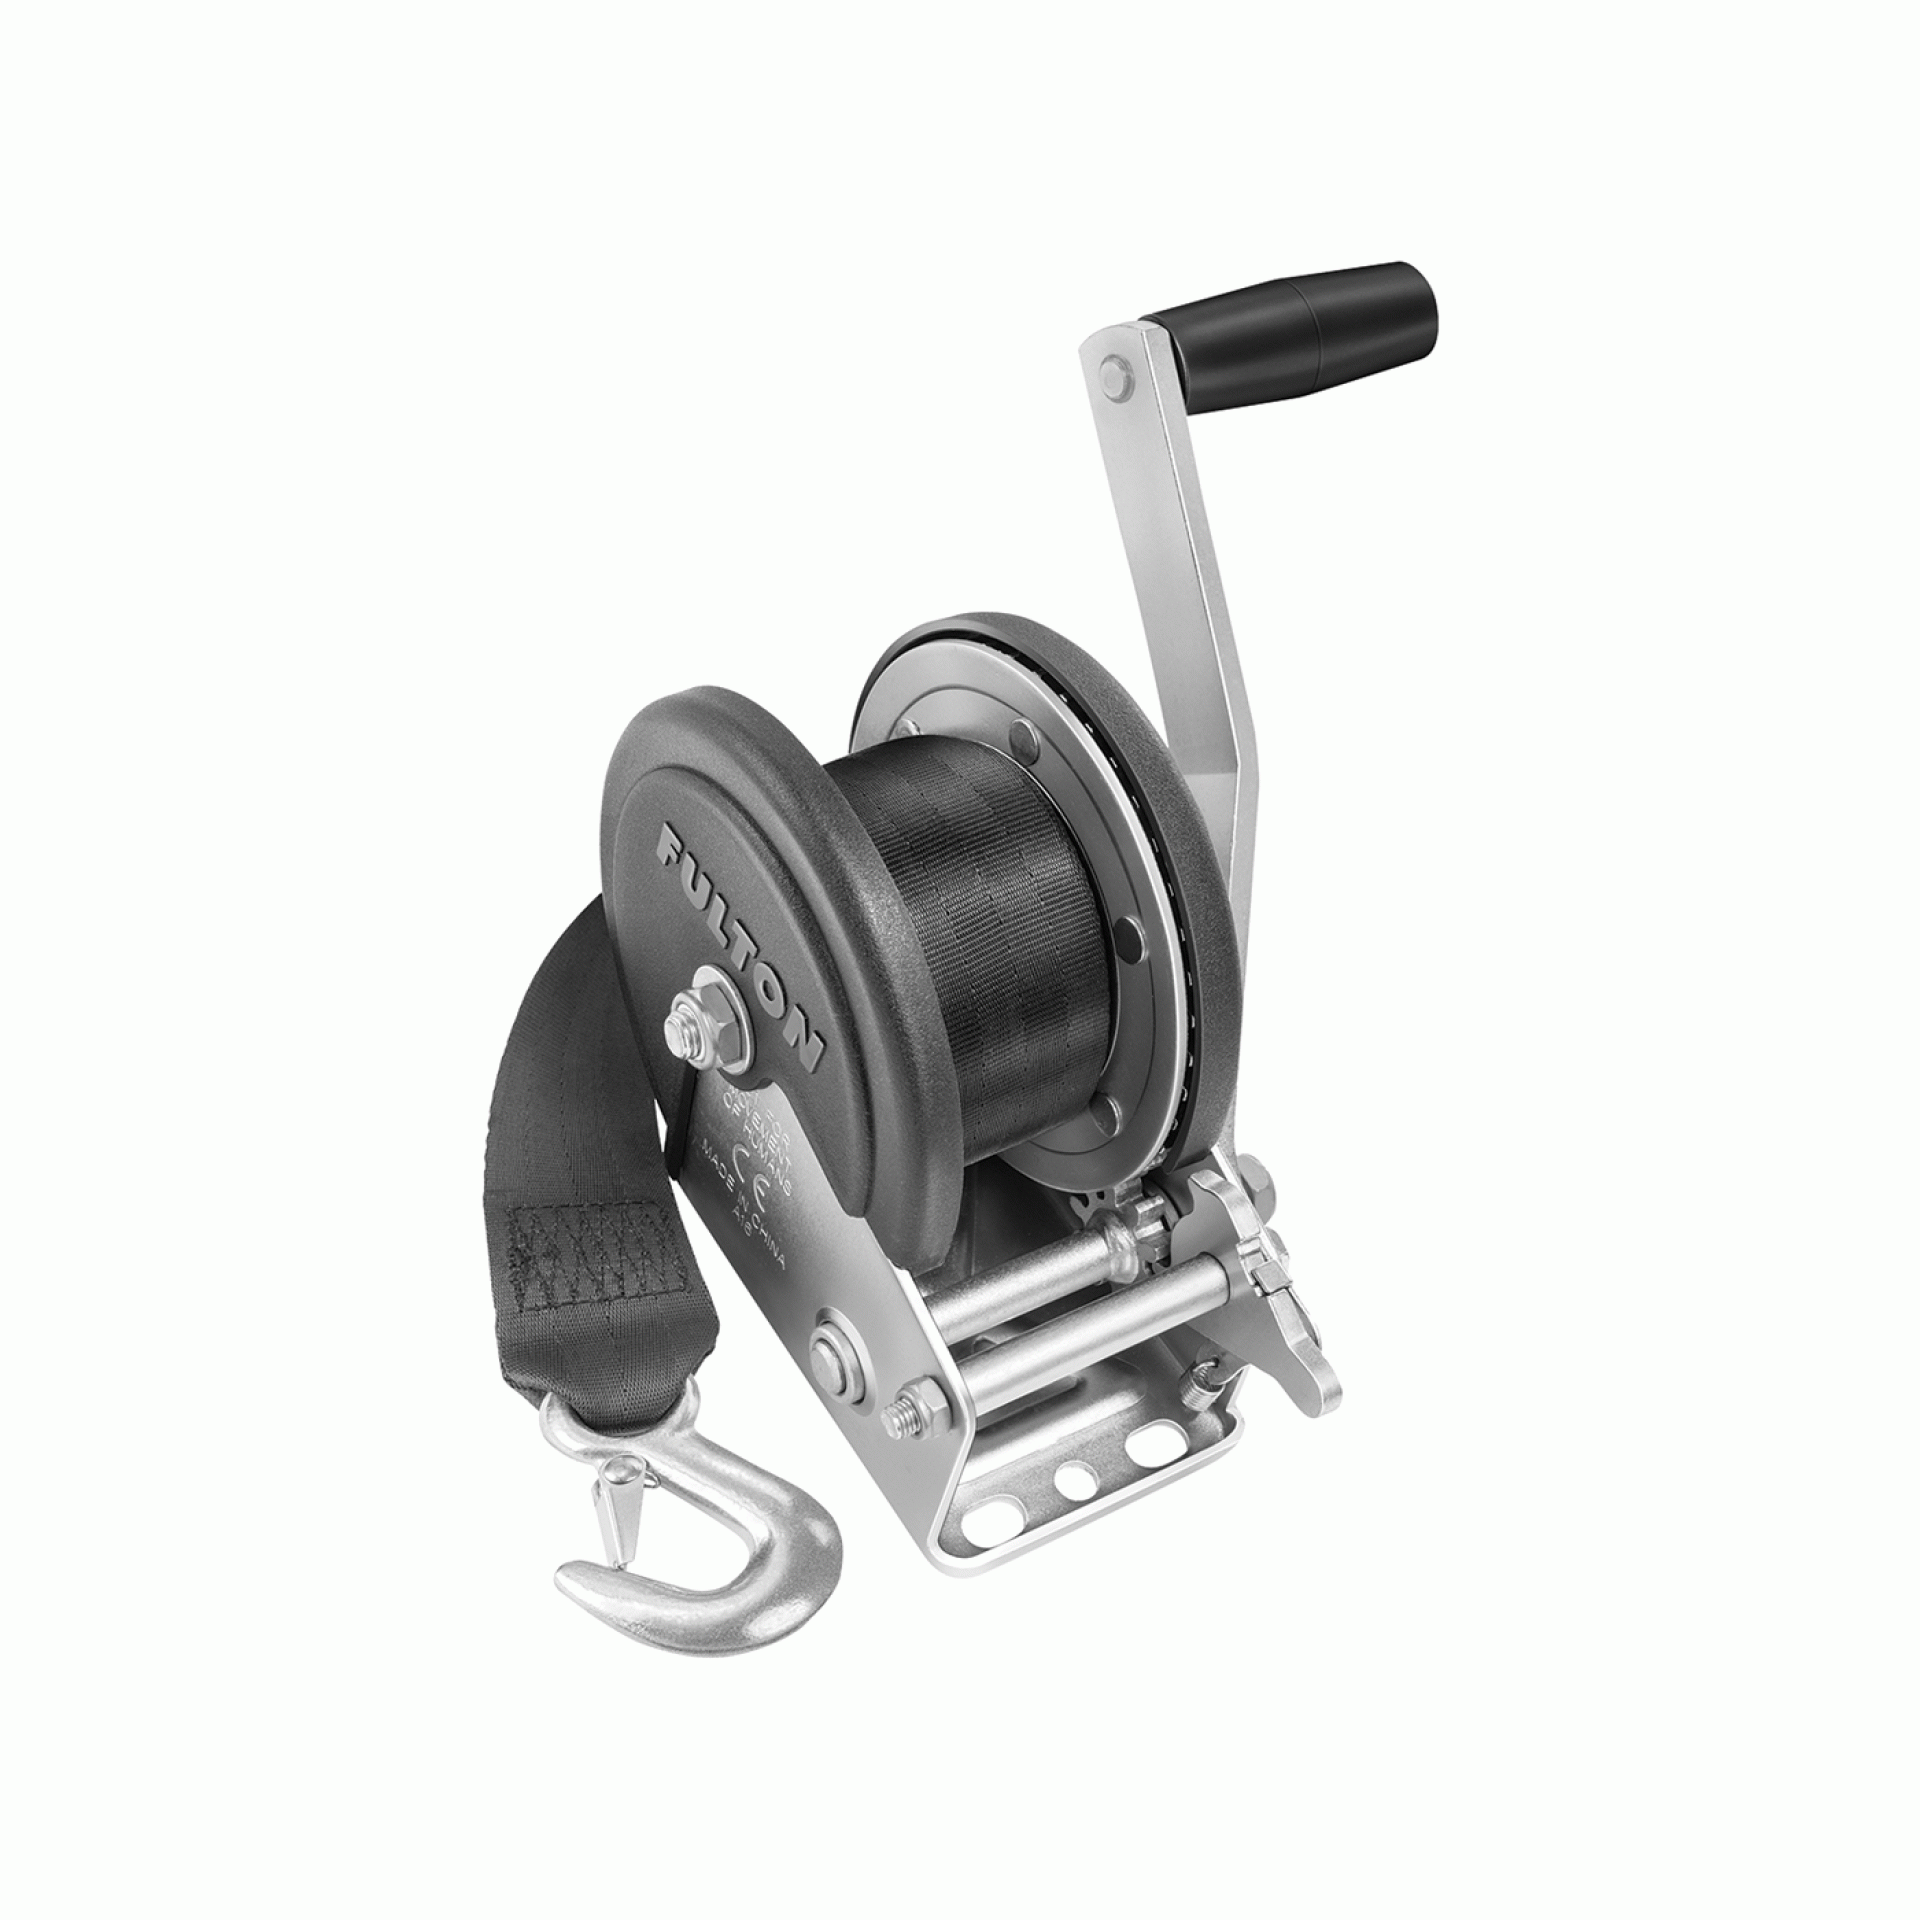 FULTON PERFORMANCE PRODUCTS | 142208 | Trailer Winch 1500lb with Strap